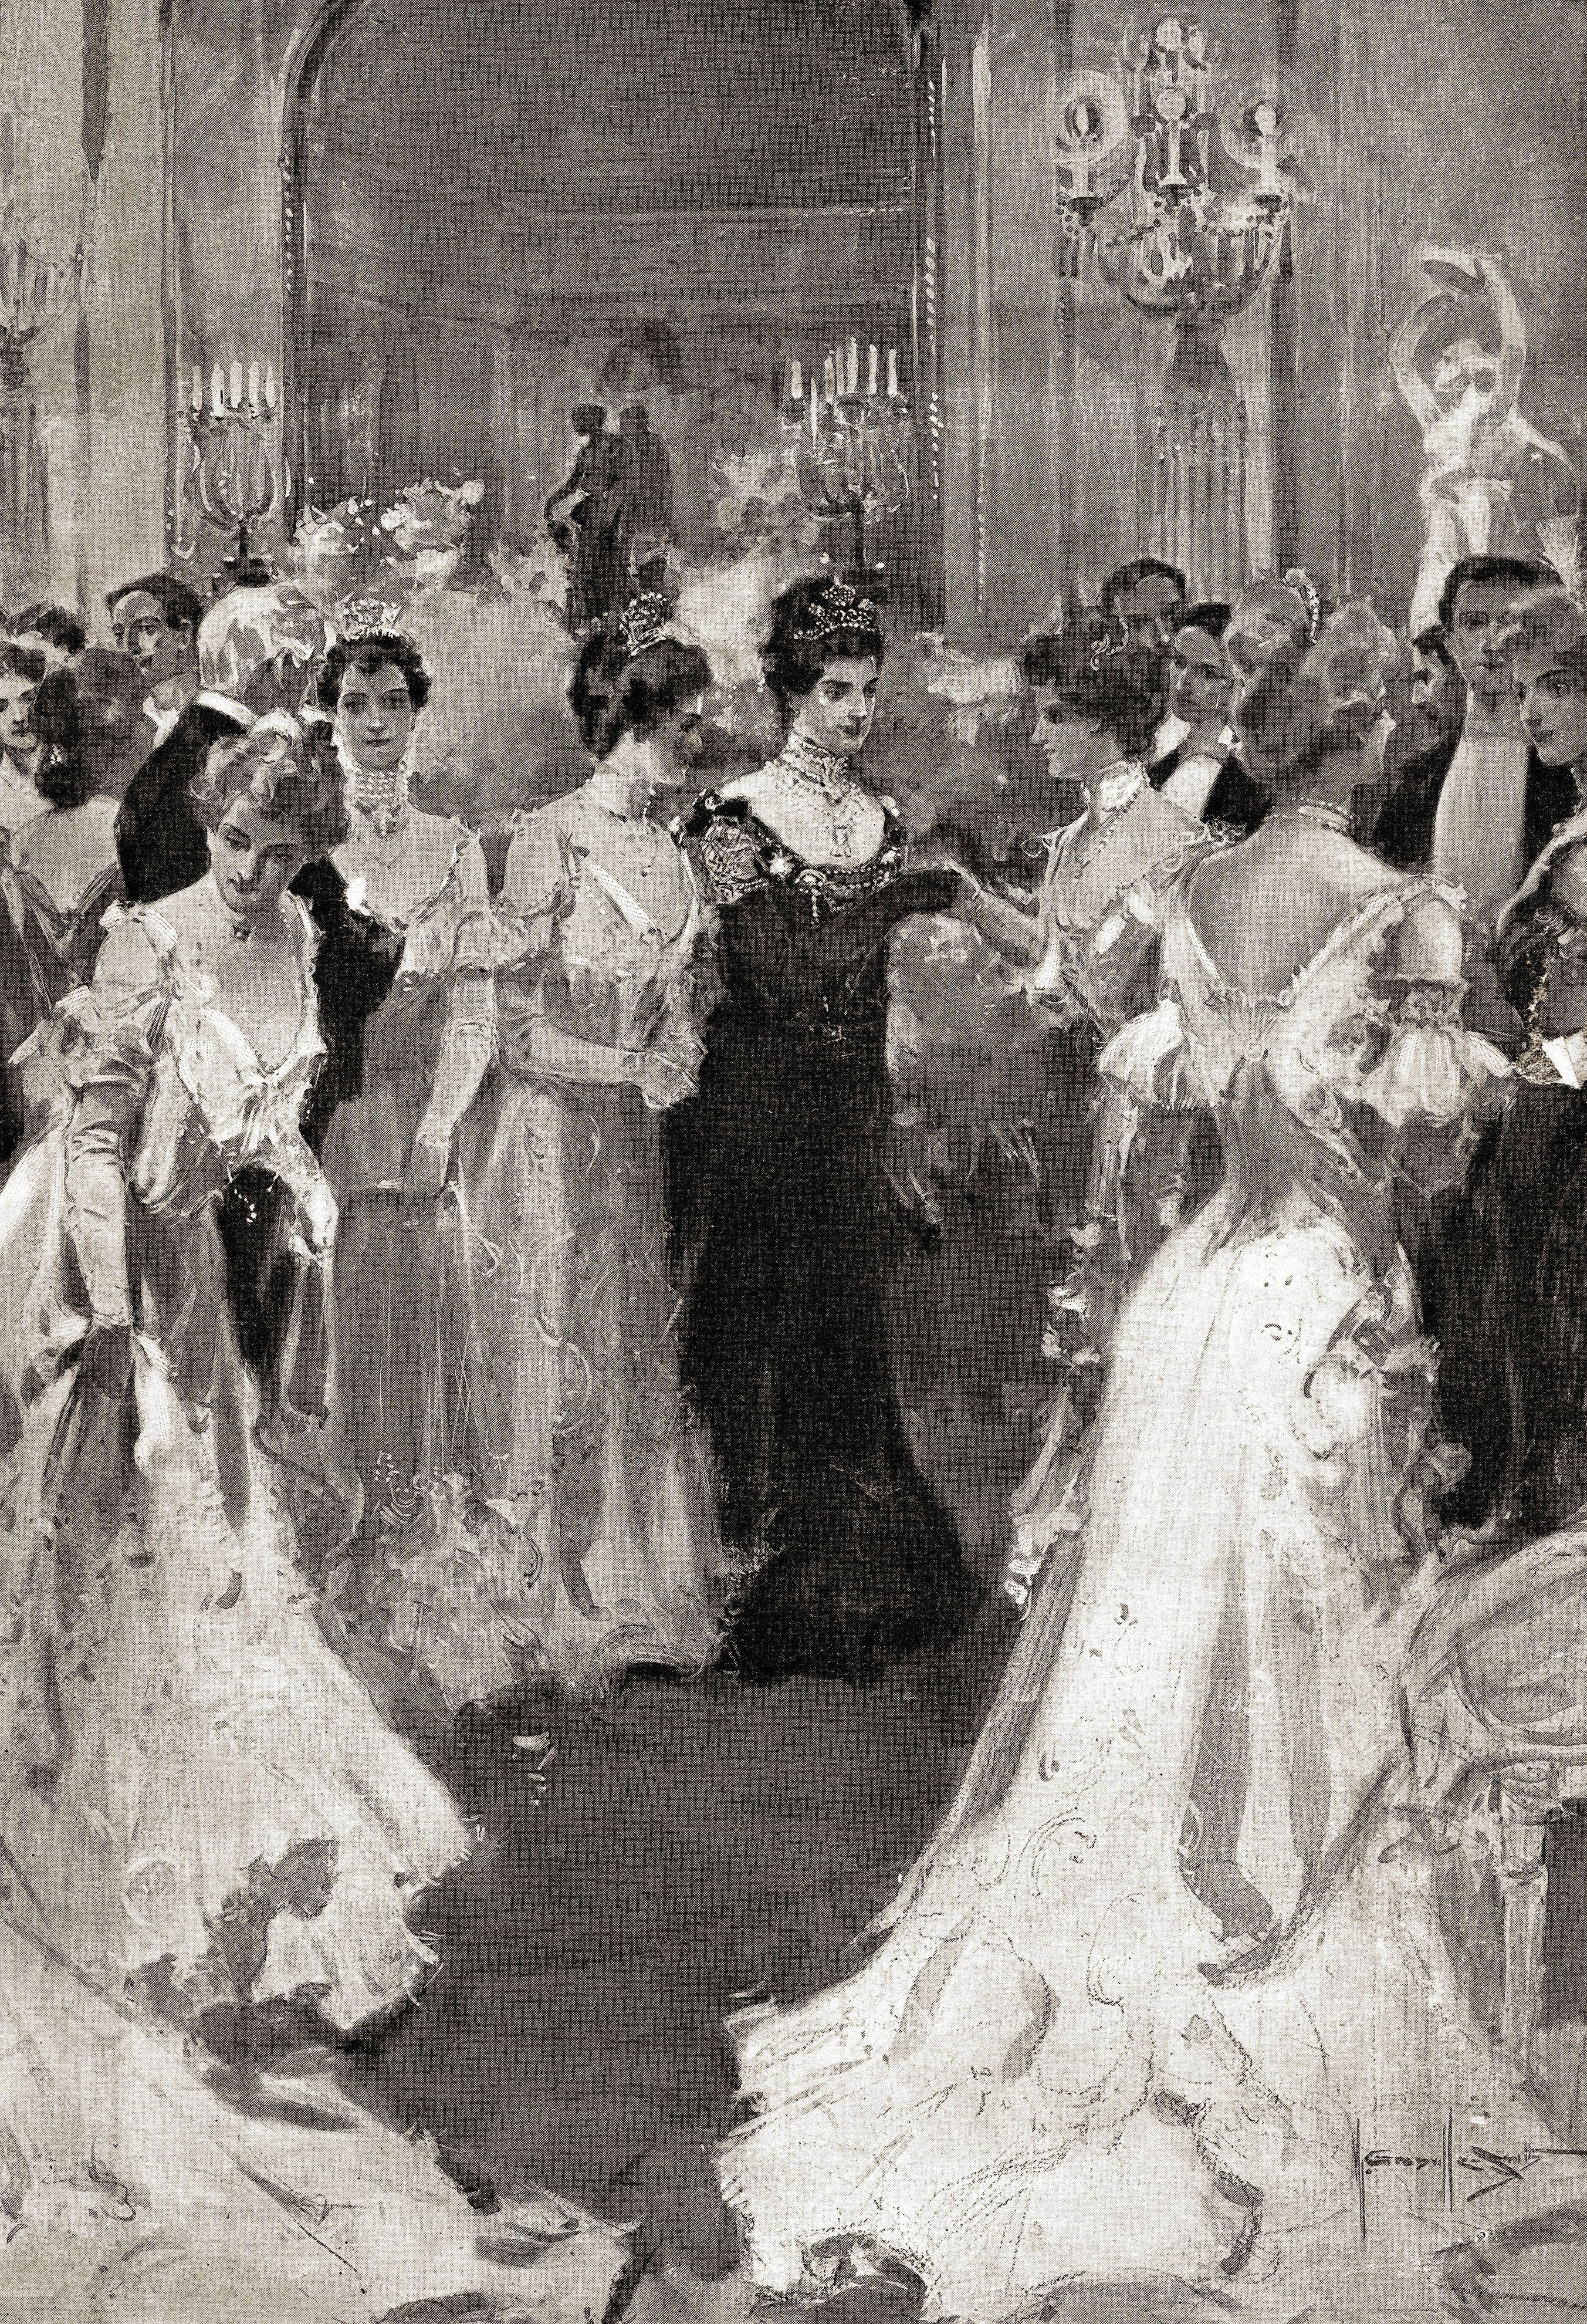 Mrs Astor Greeting Guests at her Ball